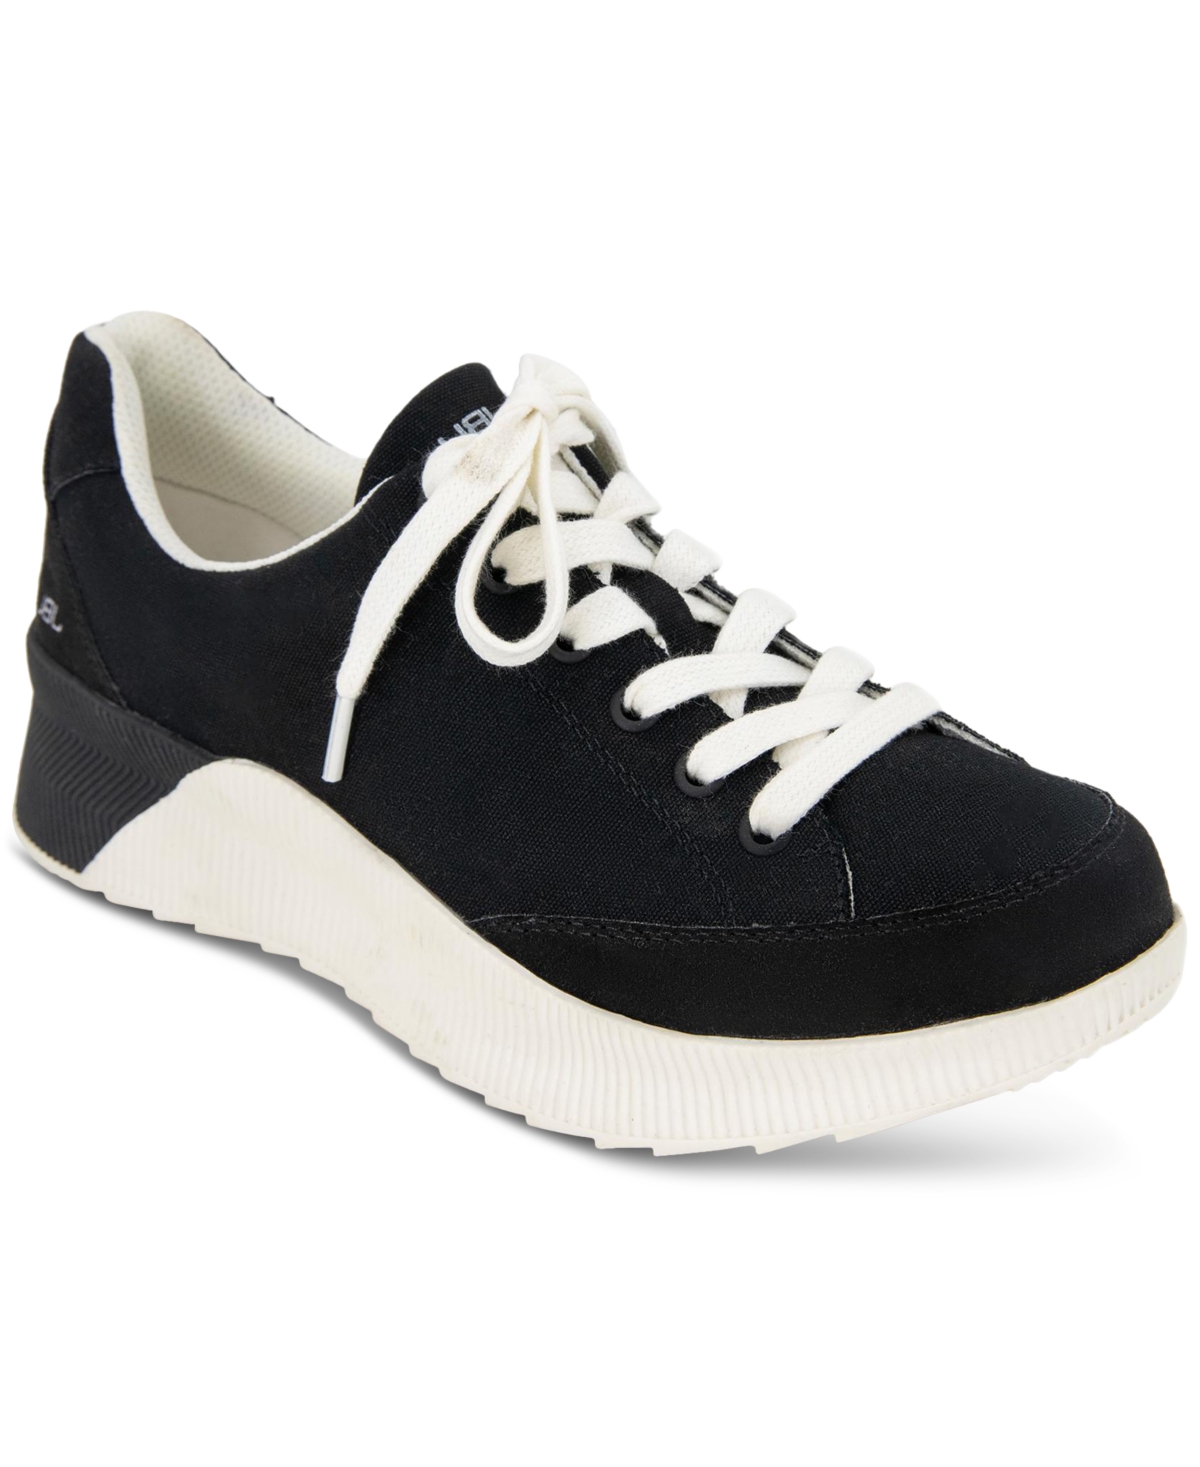 Women's Quincey Lace-Up Low-Top Sneakers - Black